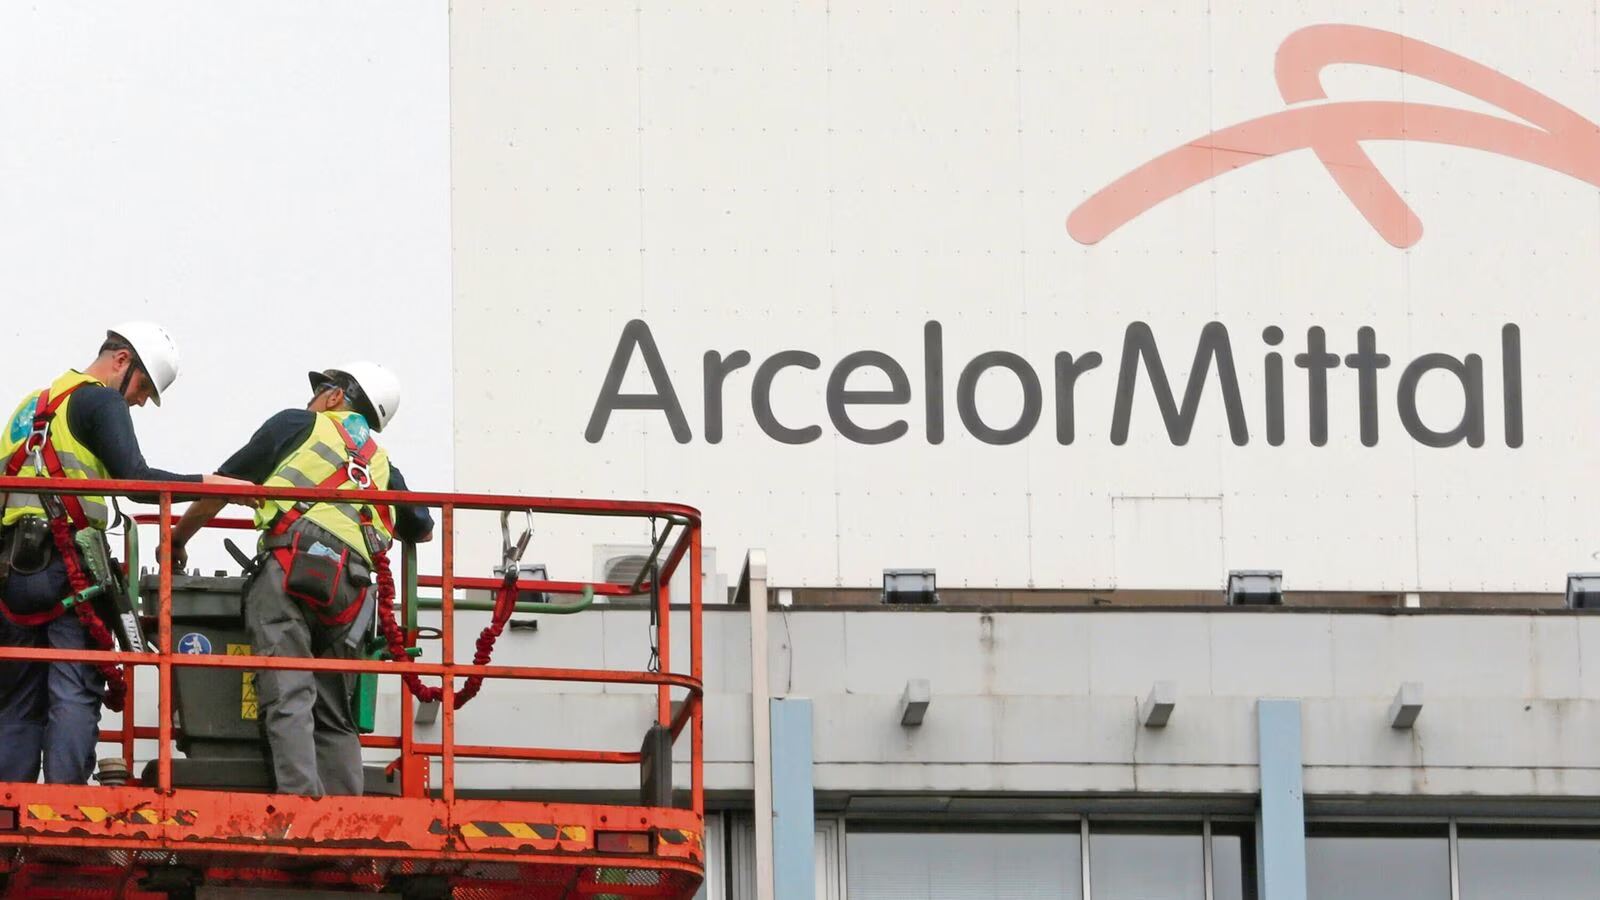 ArcelorMittal considers making an offer to buy US Steel